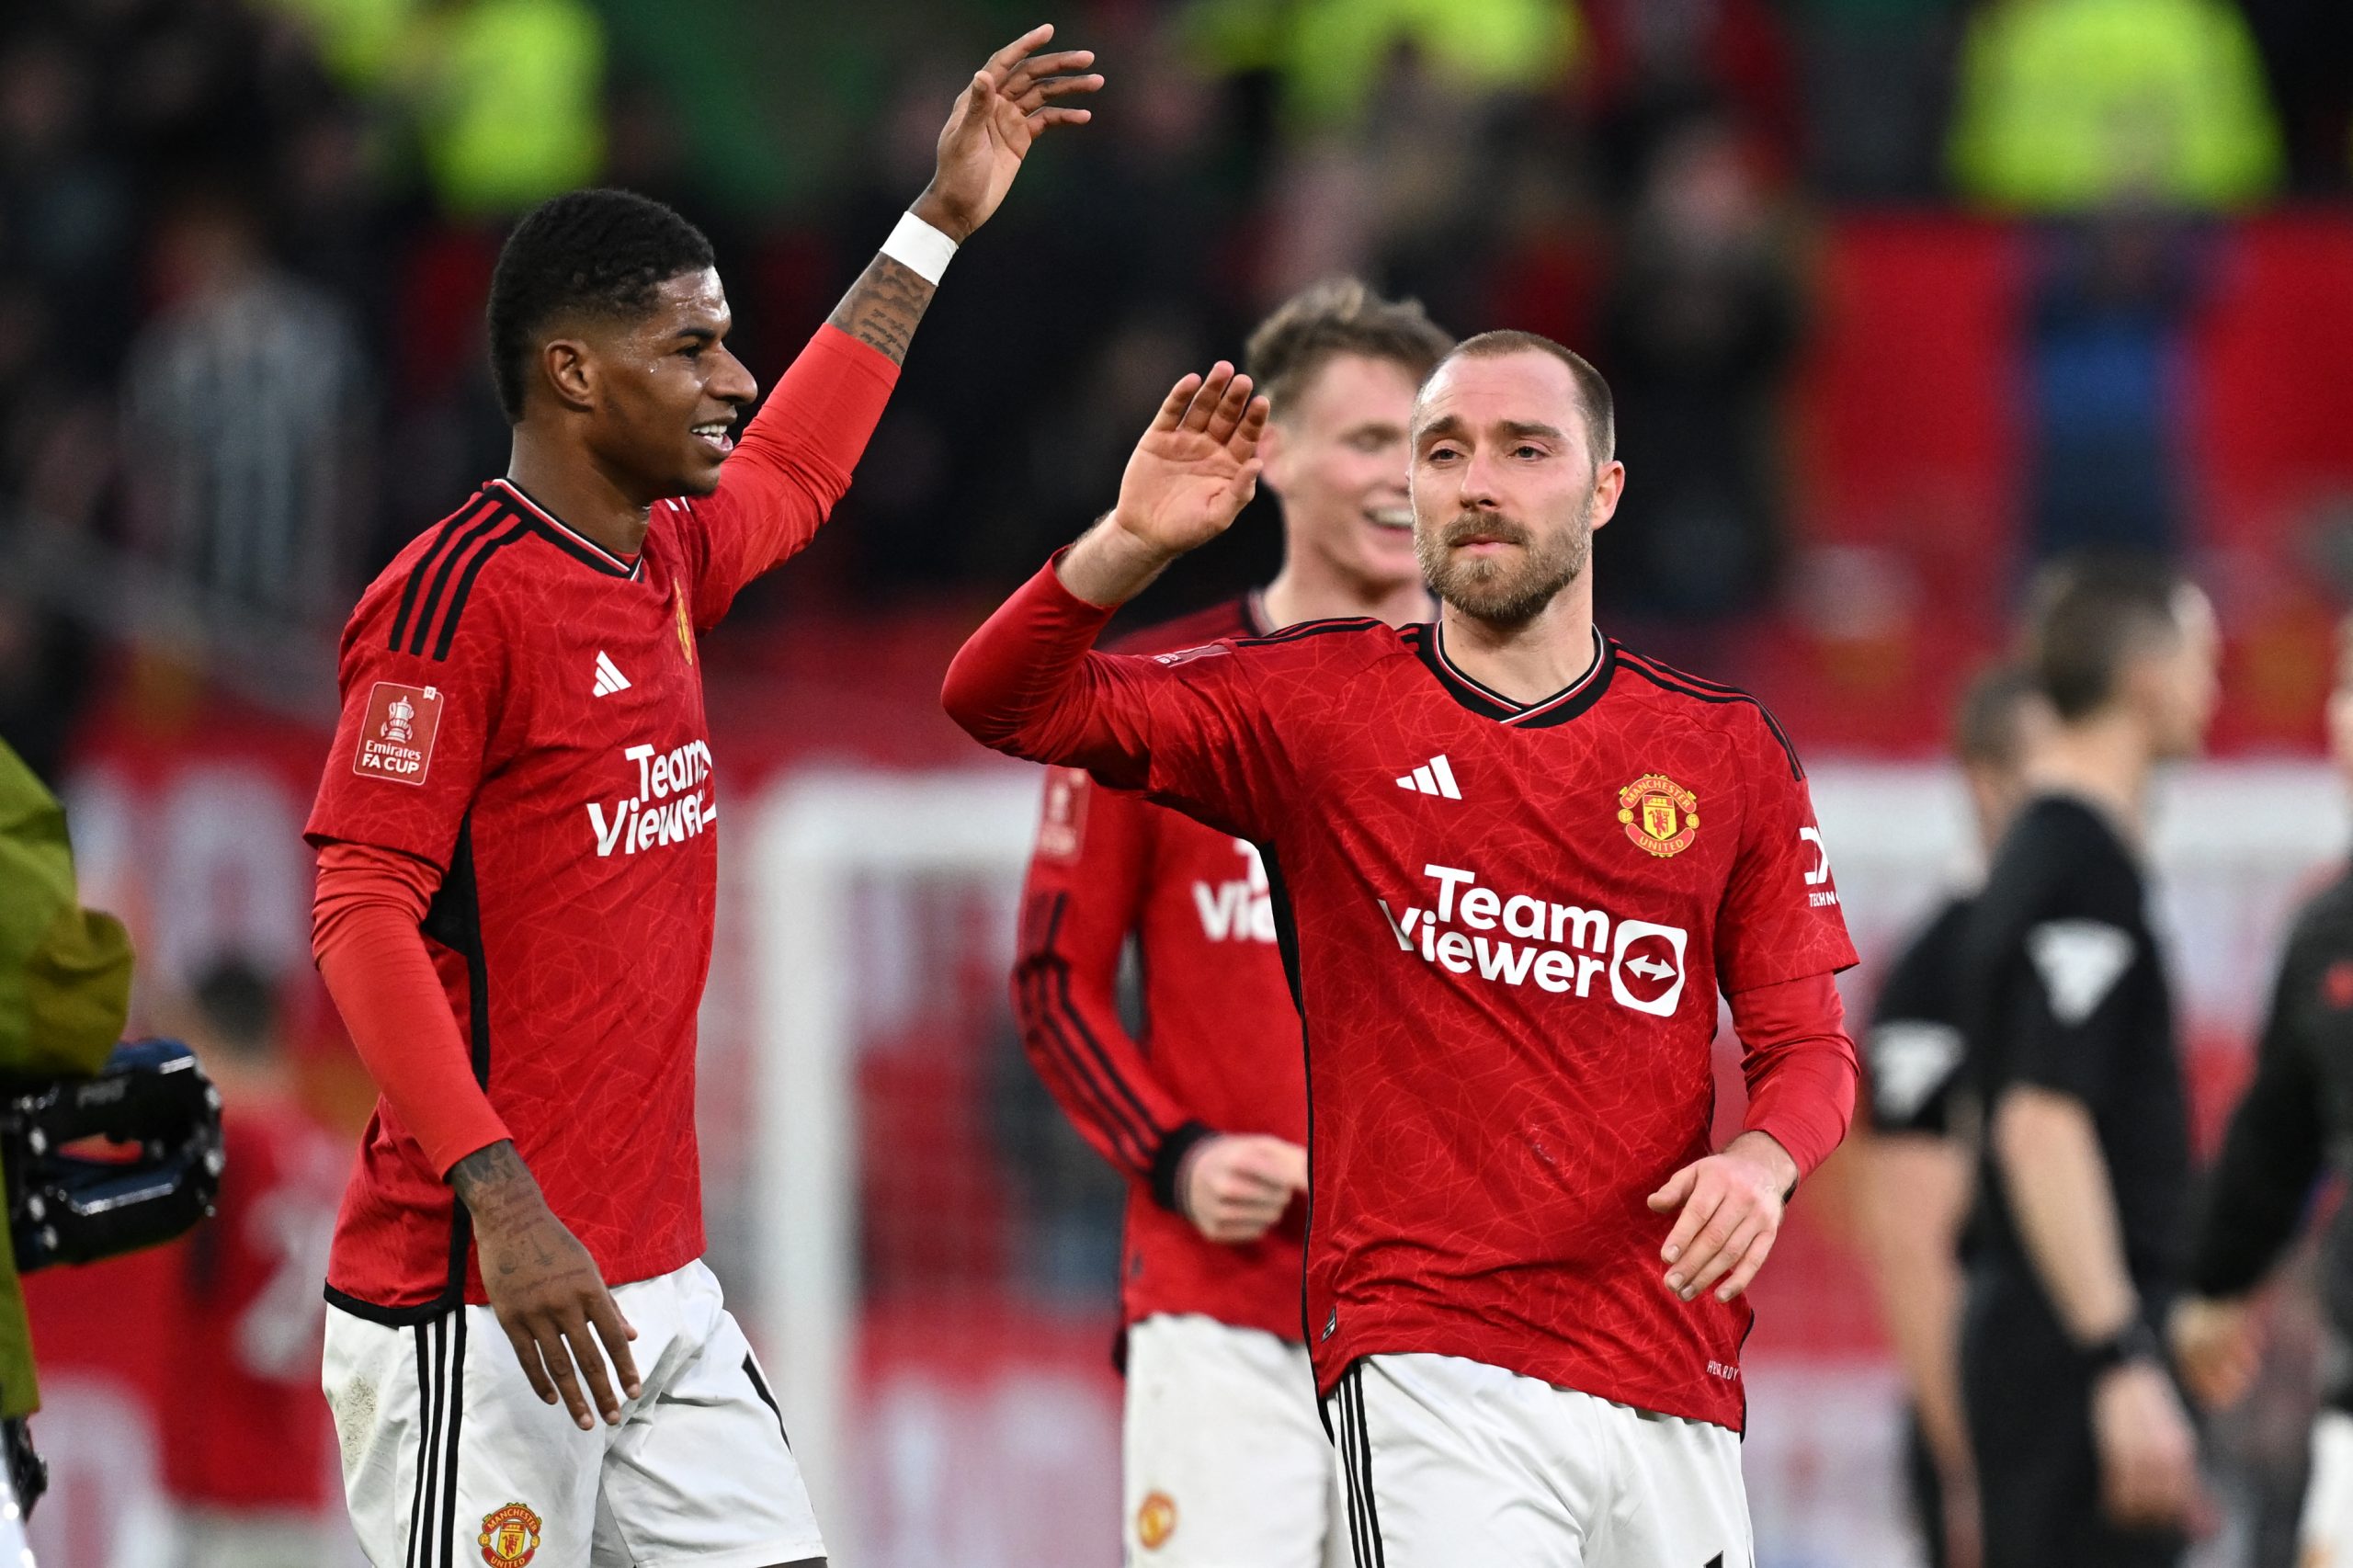 Manchester United star served as inspiration to his team against Liverpool